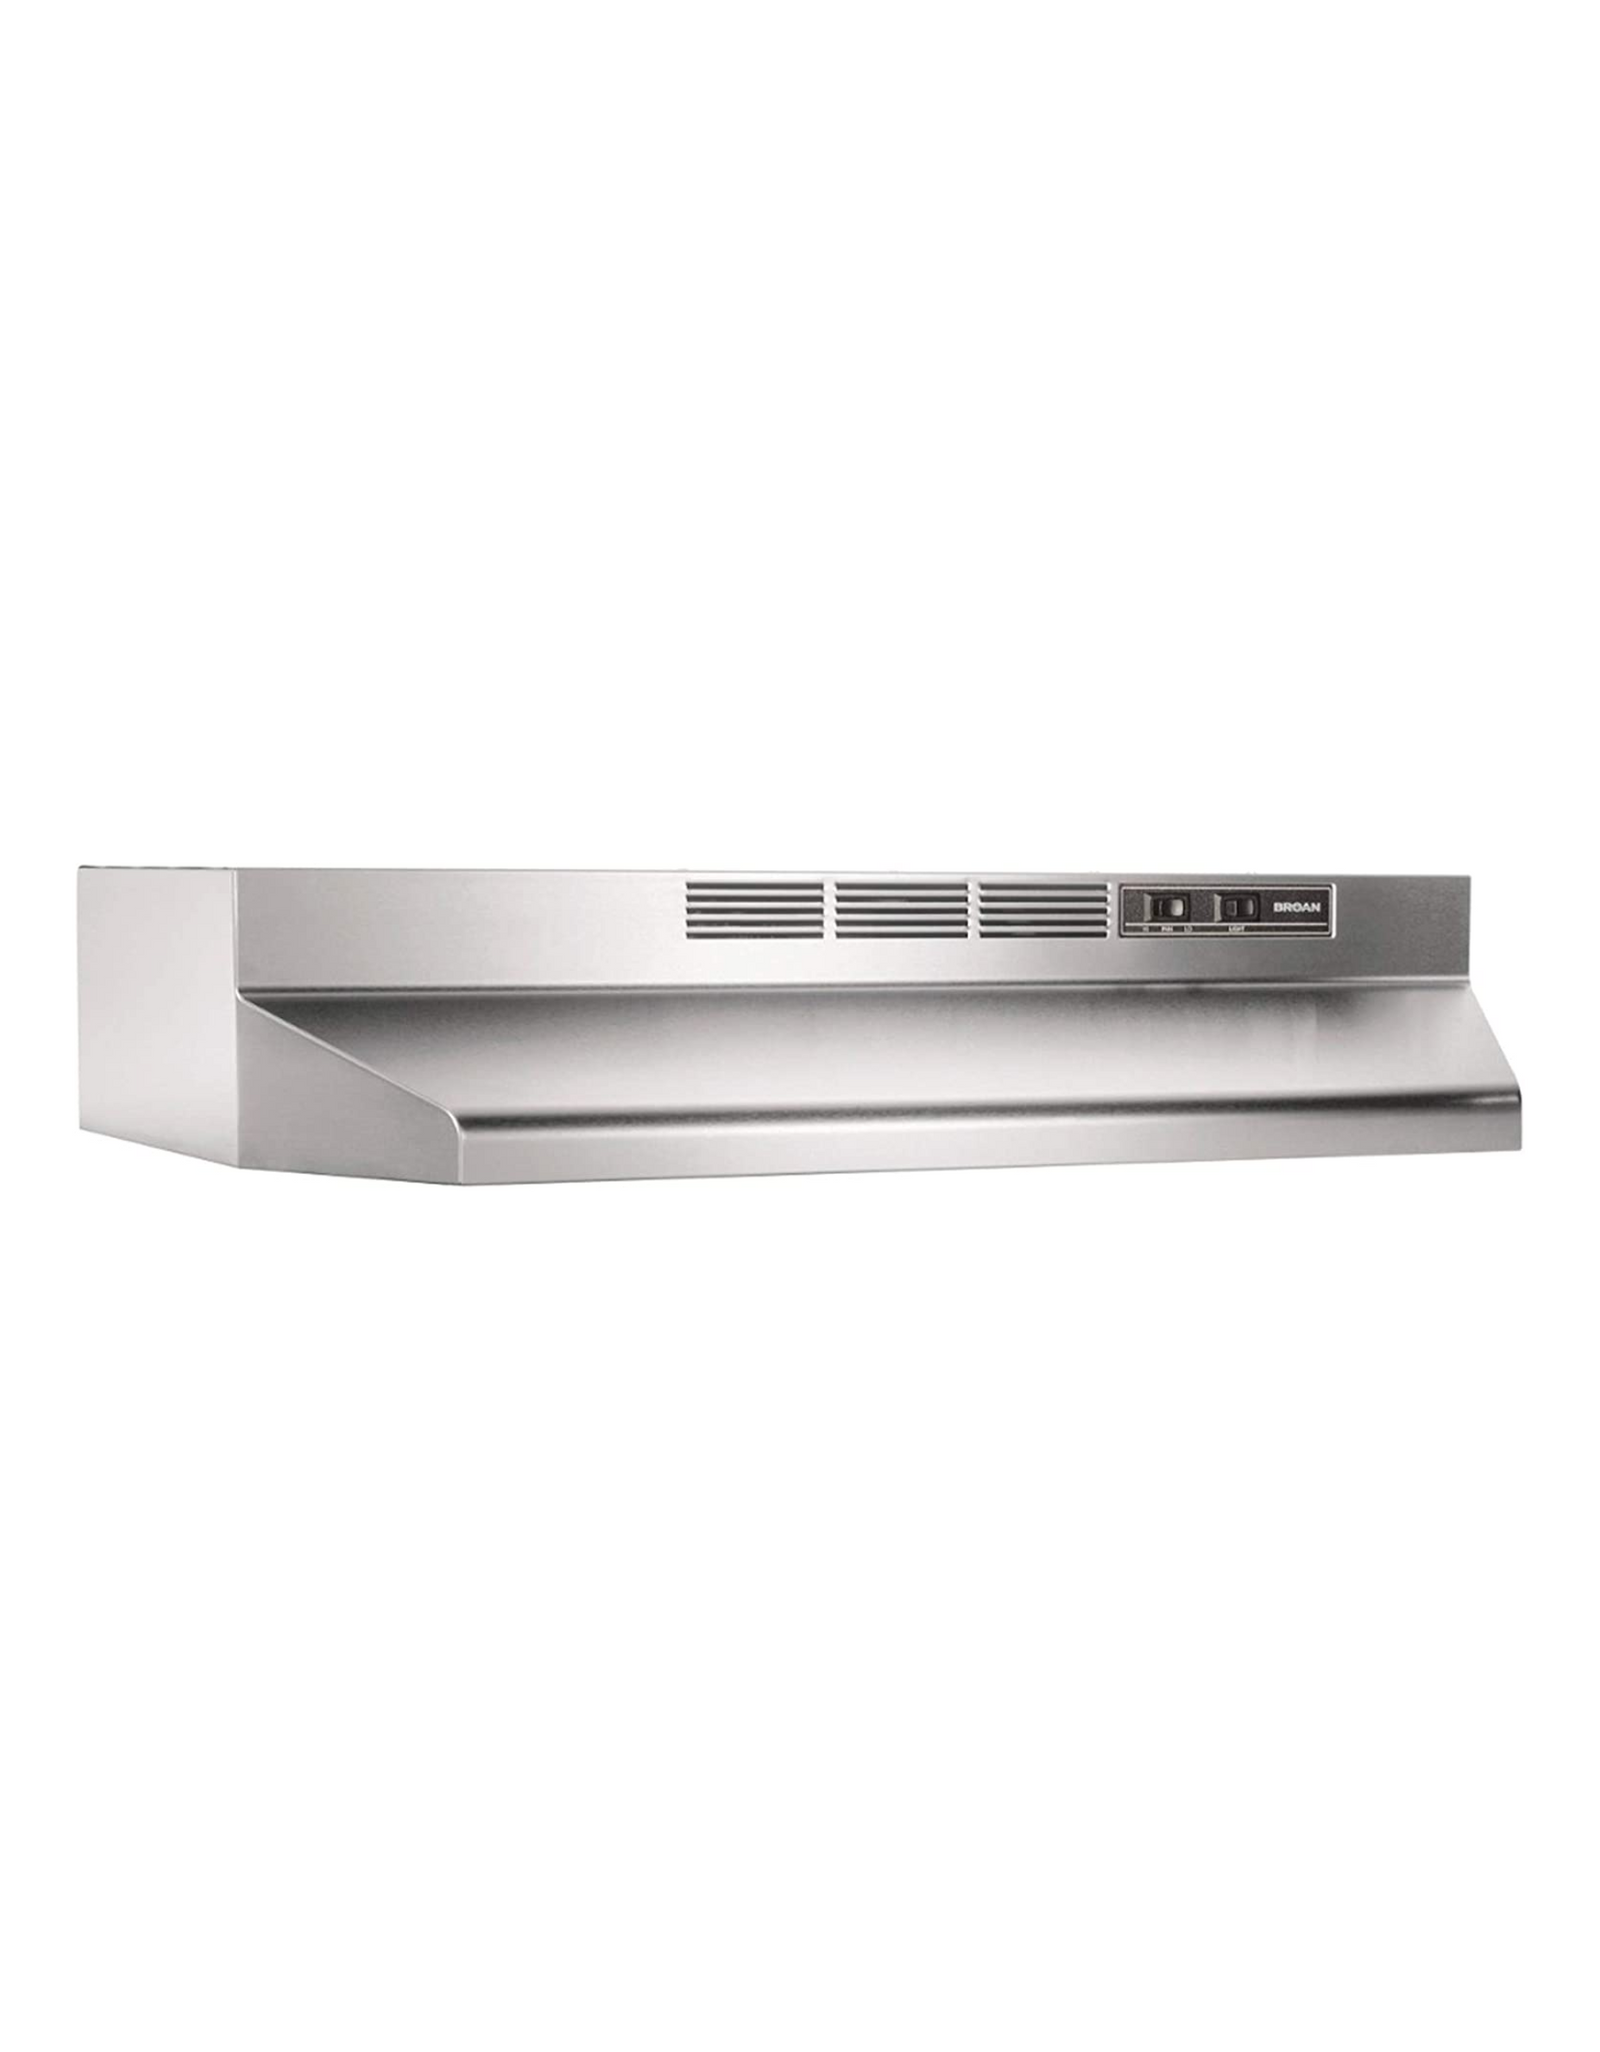 Broan-NuTone 413004 Non-Ducted Ductless Range Hood with Lights Exhaust Fan, 30", Stainless Steel